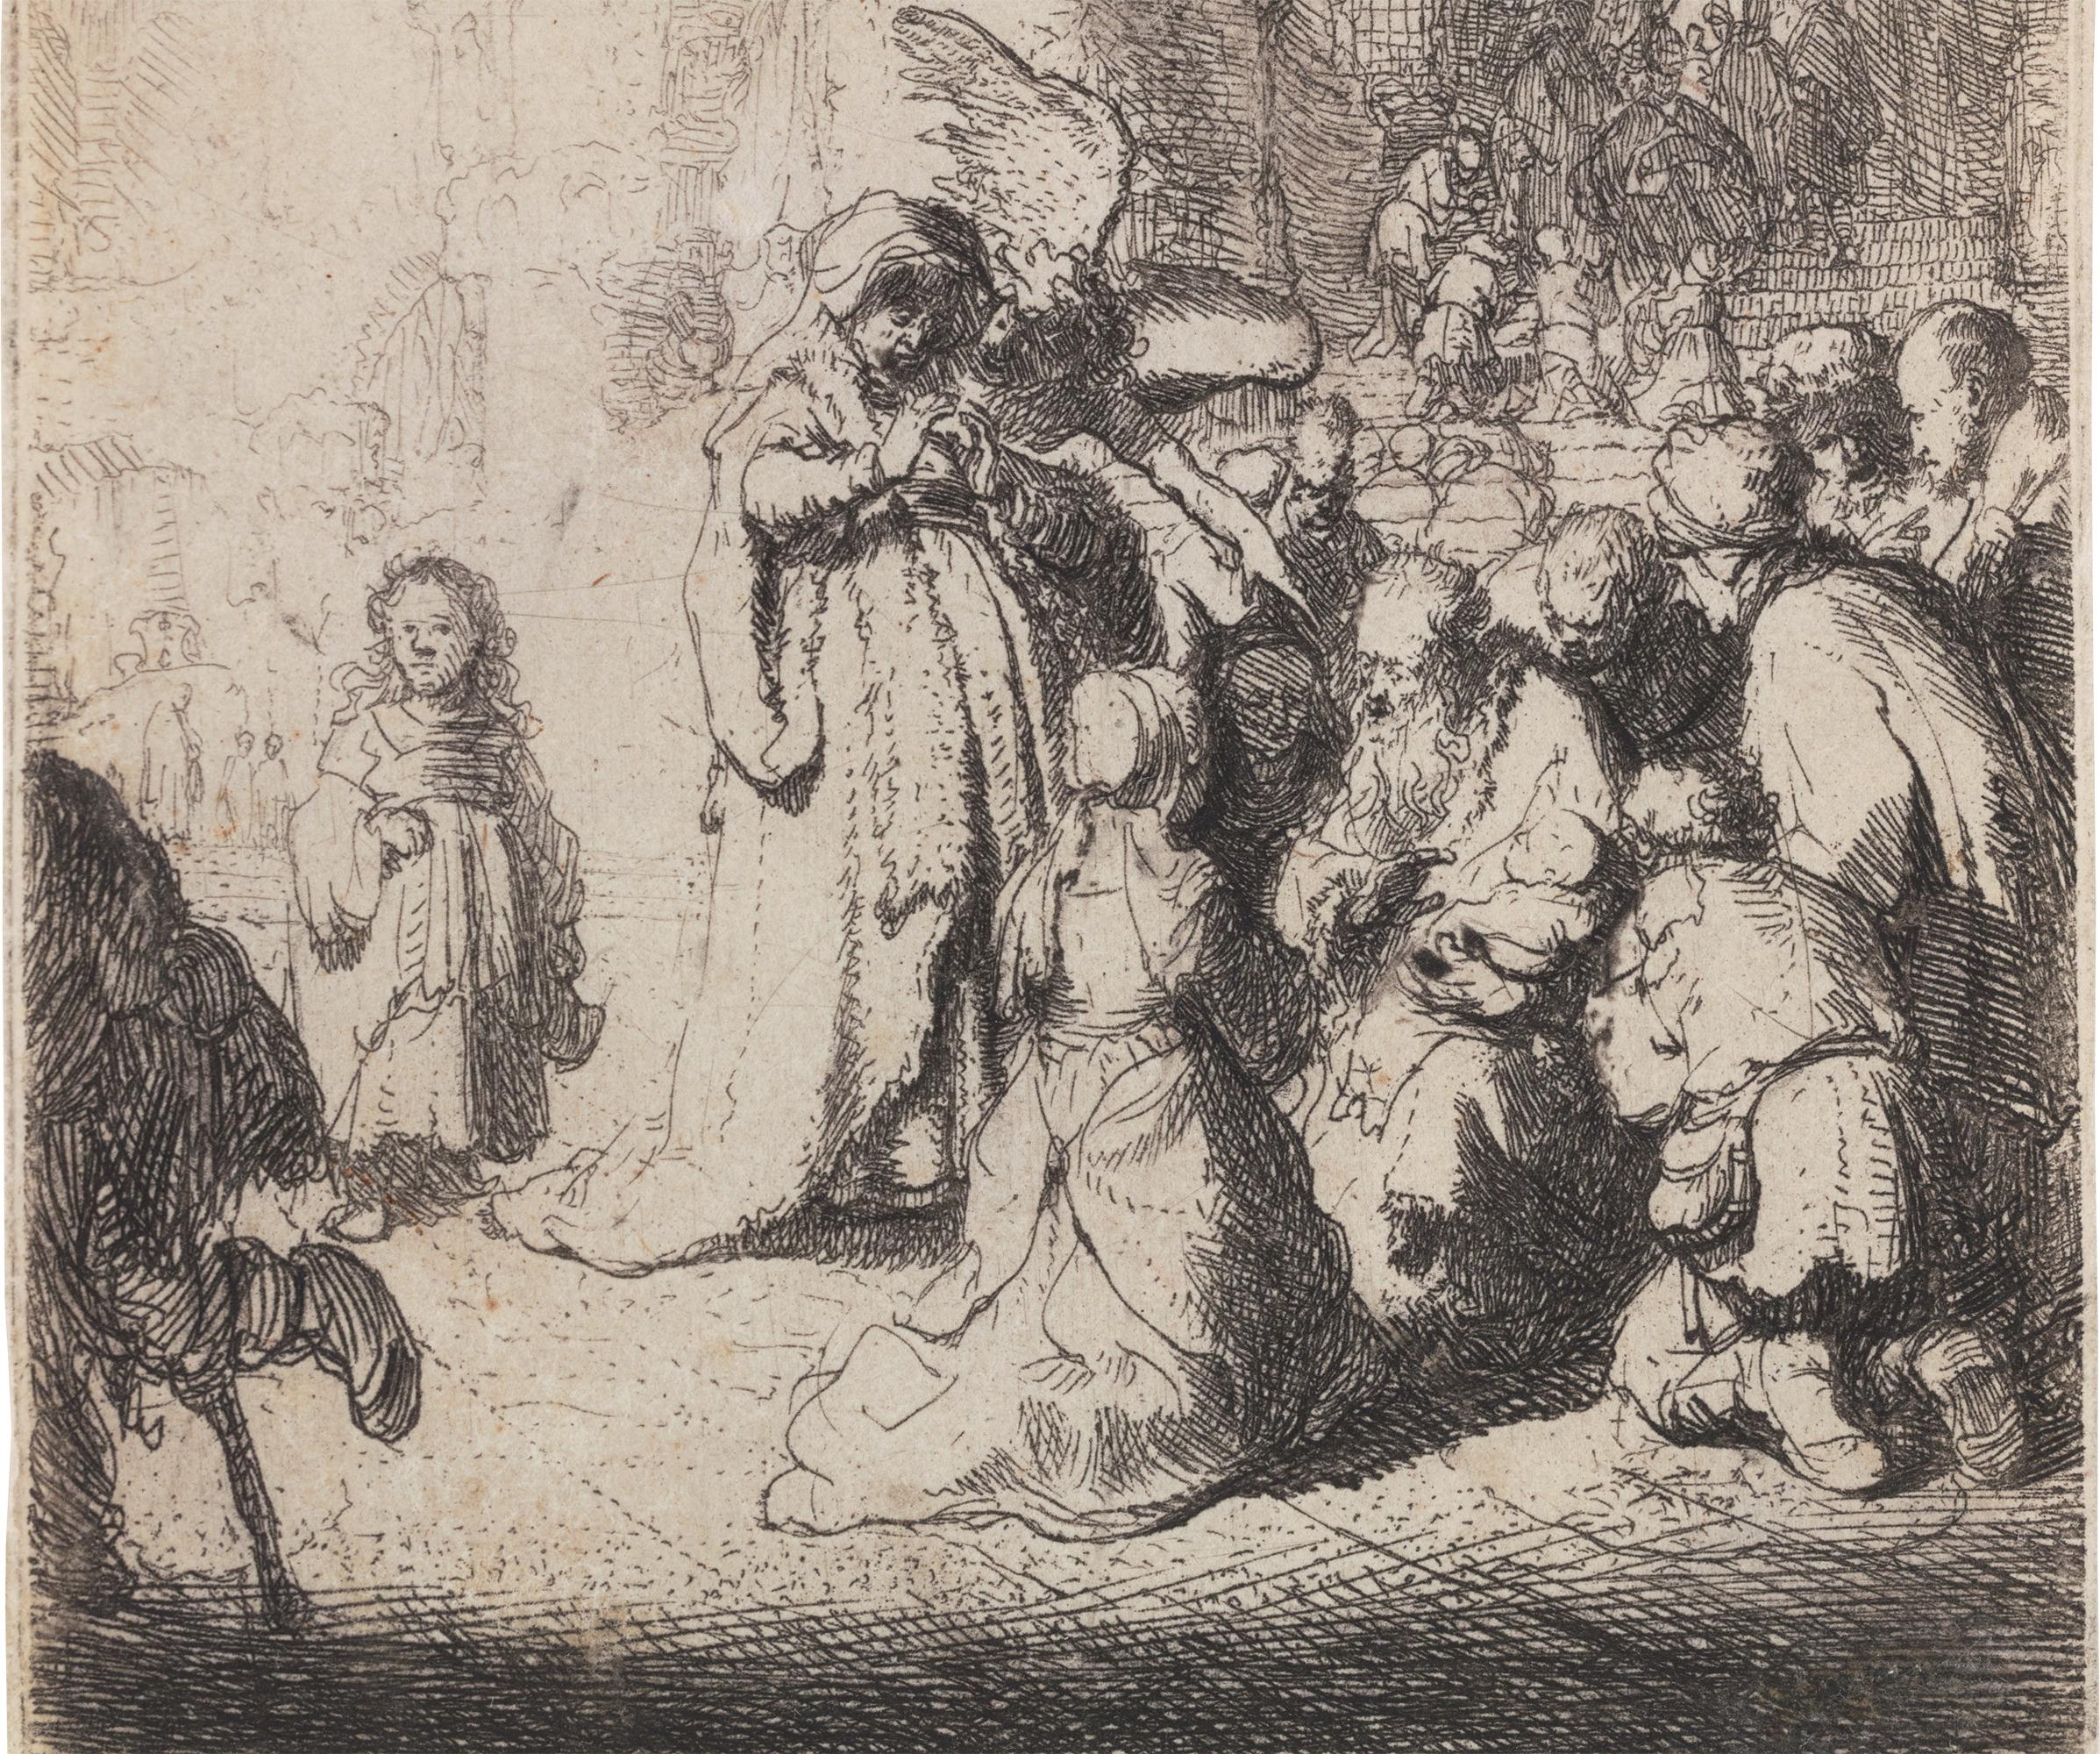 Rembrandt van Rijn
1606-1669  Dutch

The Presentation in the Temple with the Angel

Etching on paper
New Hollstein’s second state of II
Signed in monogram and dated 